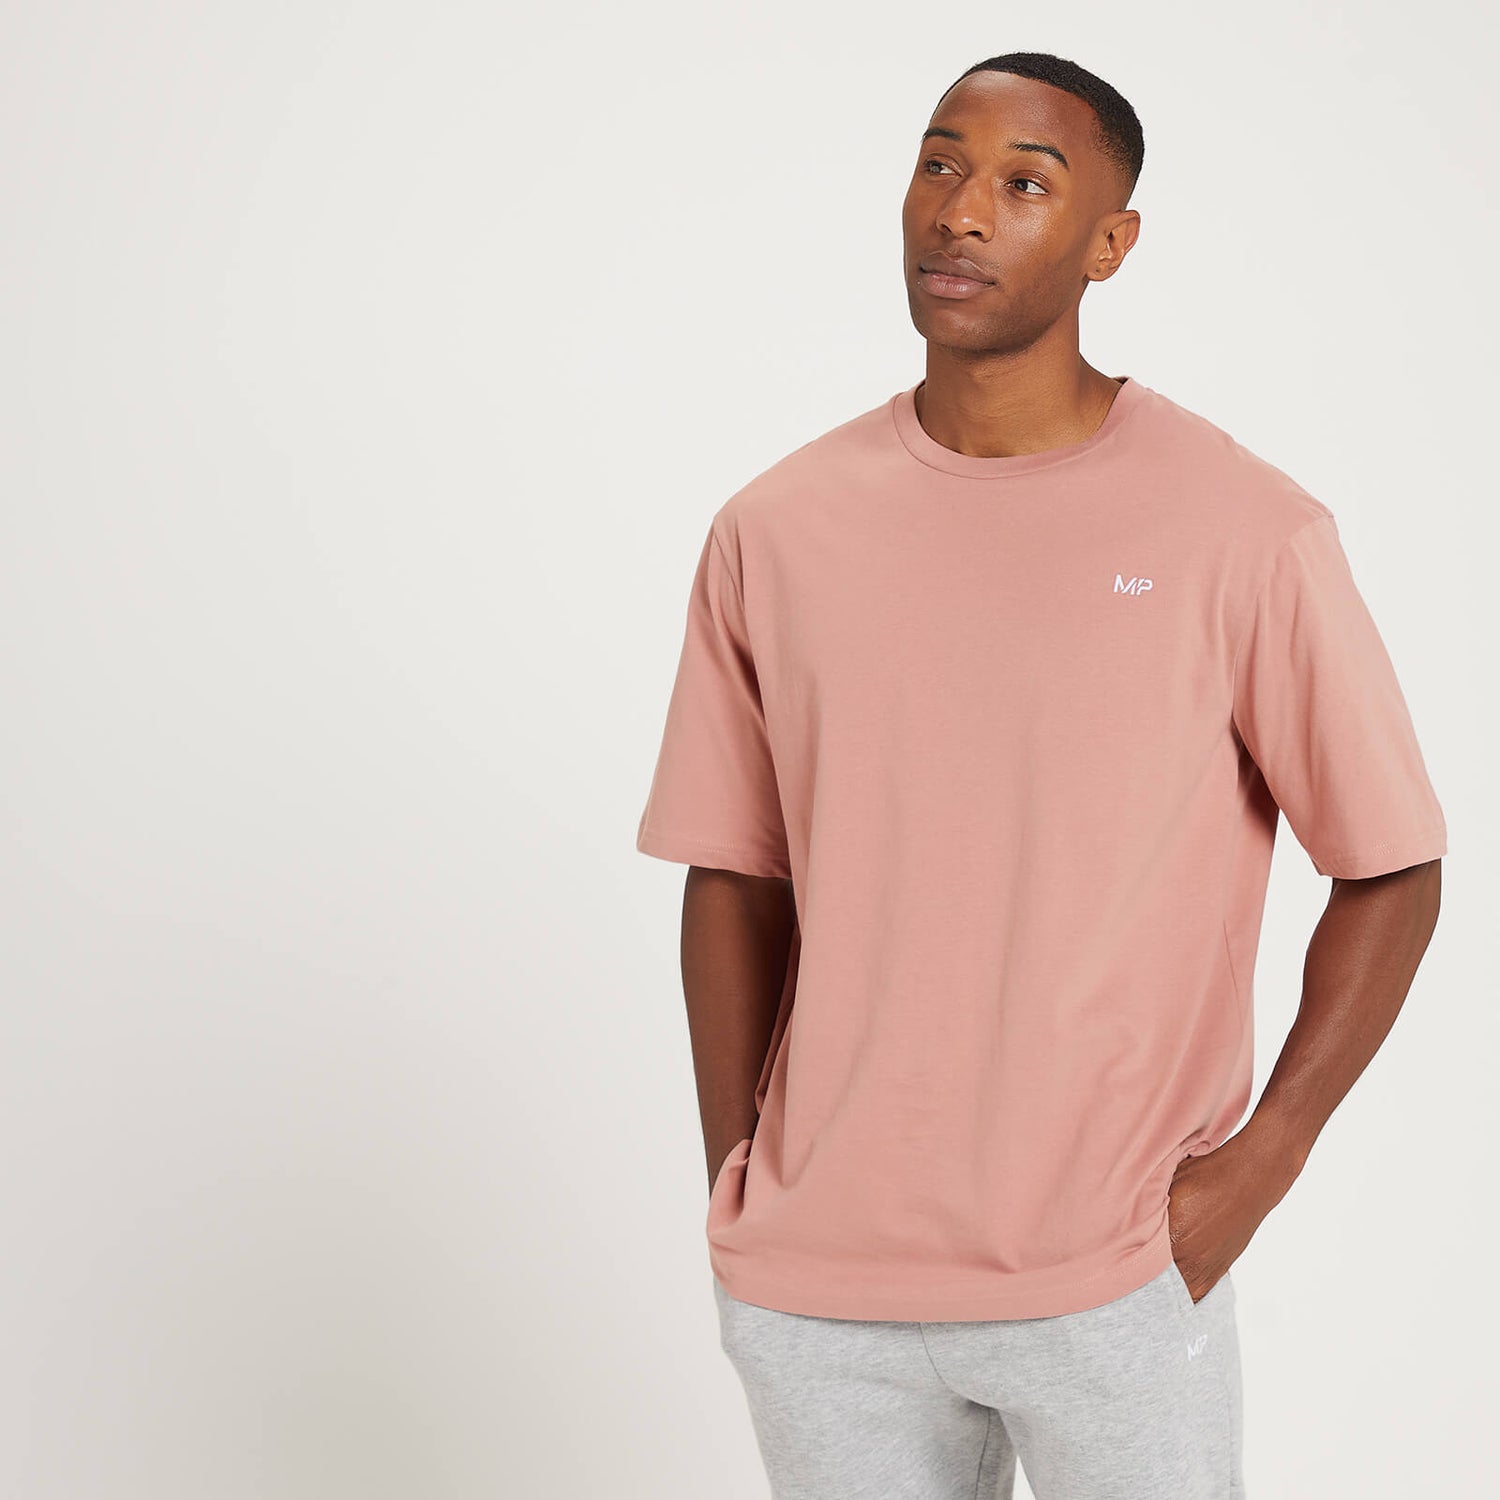 MP Men's Rest Day Oversized T-Shirt - Washed Pink - XL